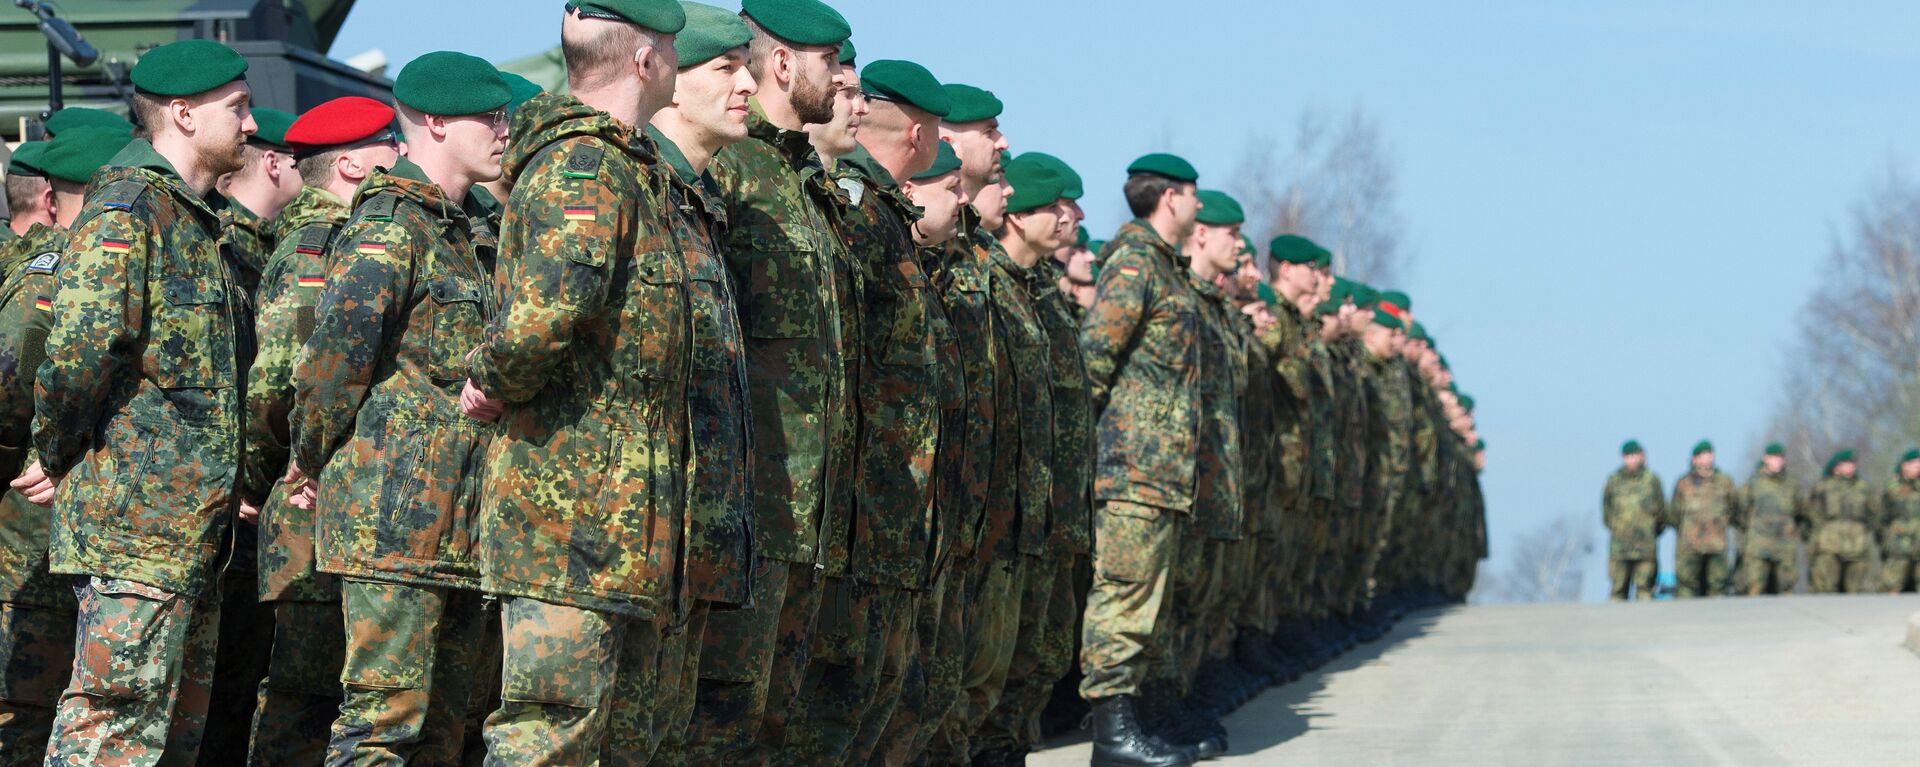 German army soldiers who are members of the Stabilisation forces line up at the barracks Erzgebirgskaserne in Marienberg, eastern Germany, on April 10, 2015, during a military exercise Noble Jump that is part of Nato Response Force - Sputnik International, 1920, 24.01.2022